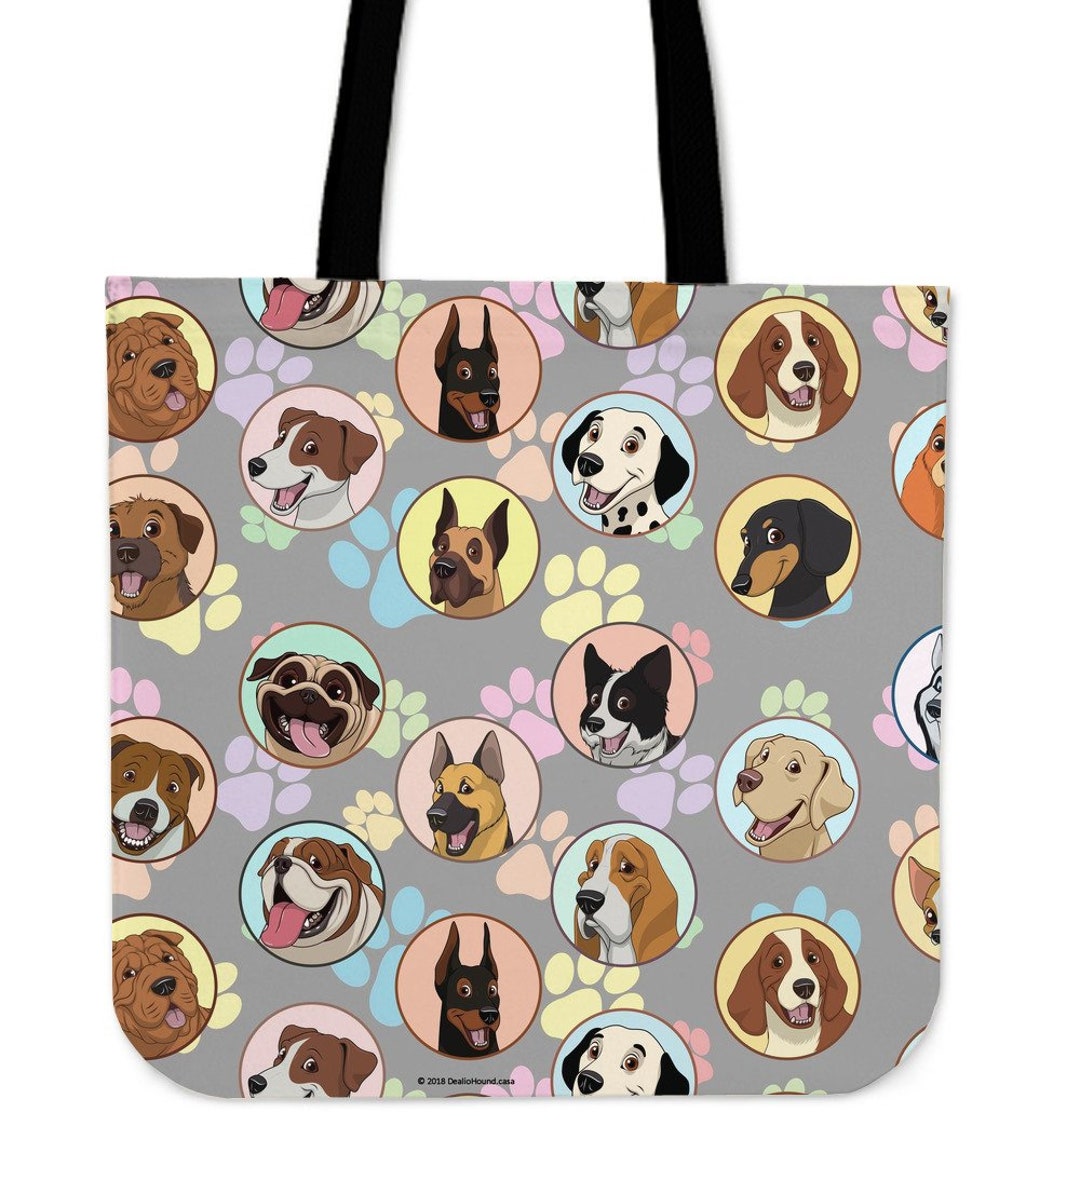 Dogs Galore Cloth Tote Shopping / Market Bag Great Gift for - Etsy